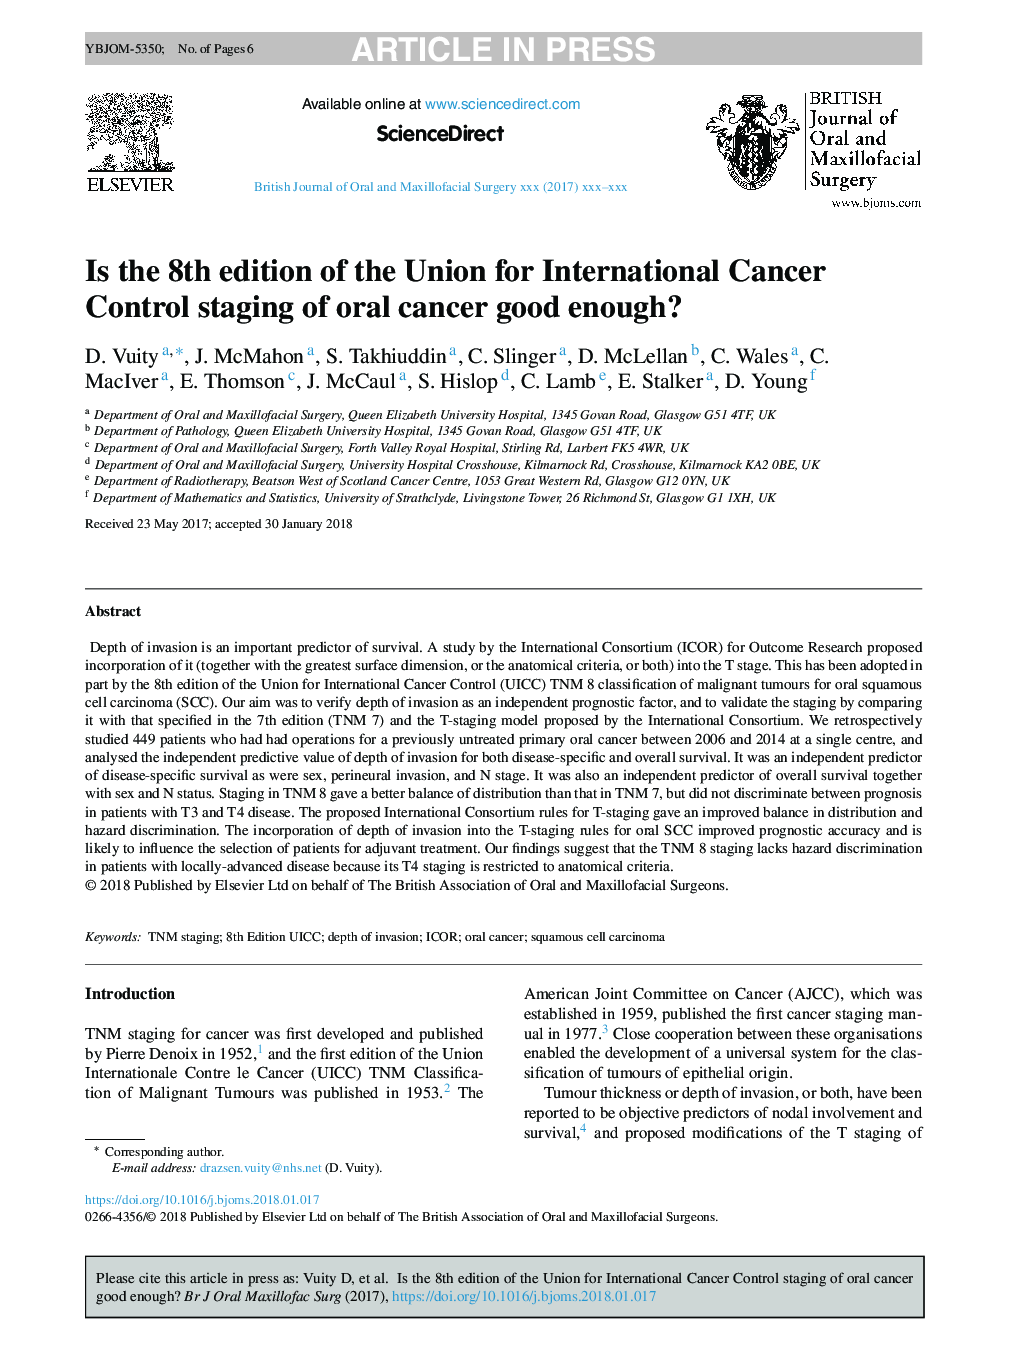 Is the 8th edition of the Union for International Cancer Control staging of oral cancer good enough?